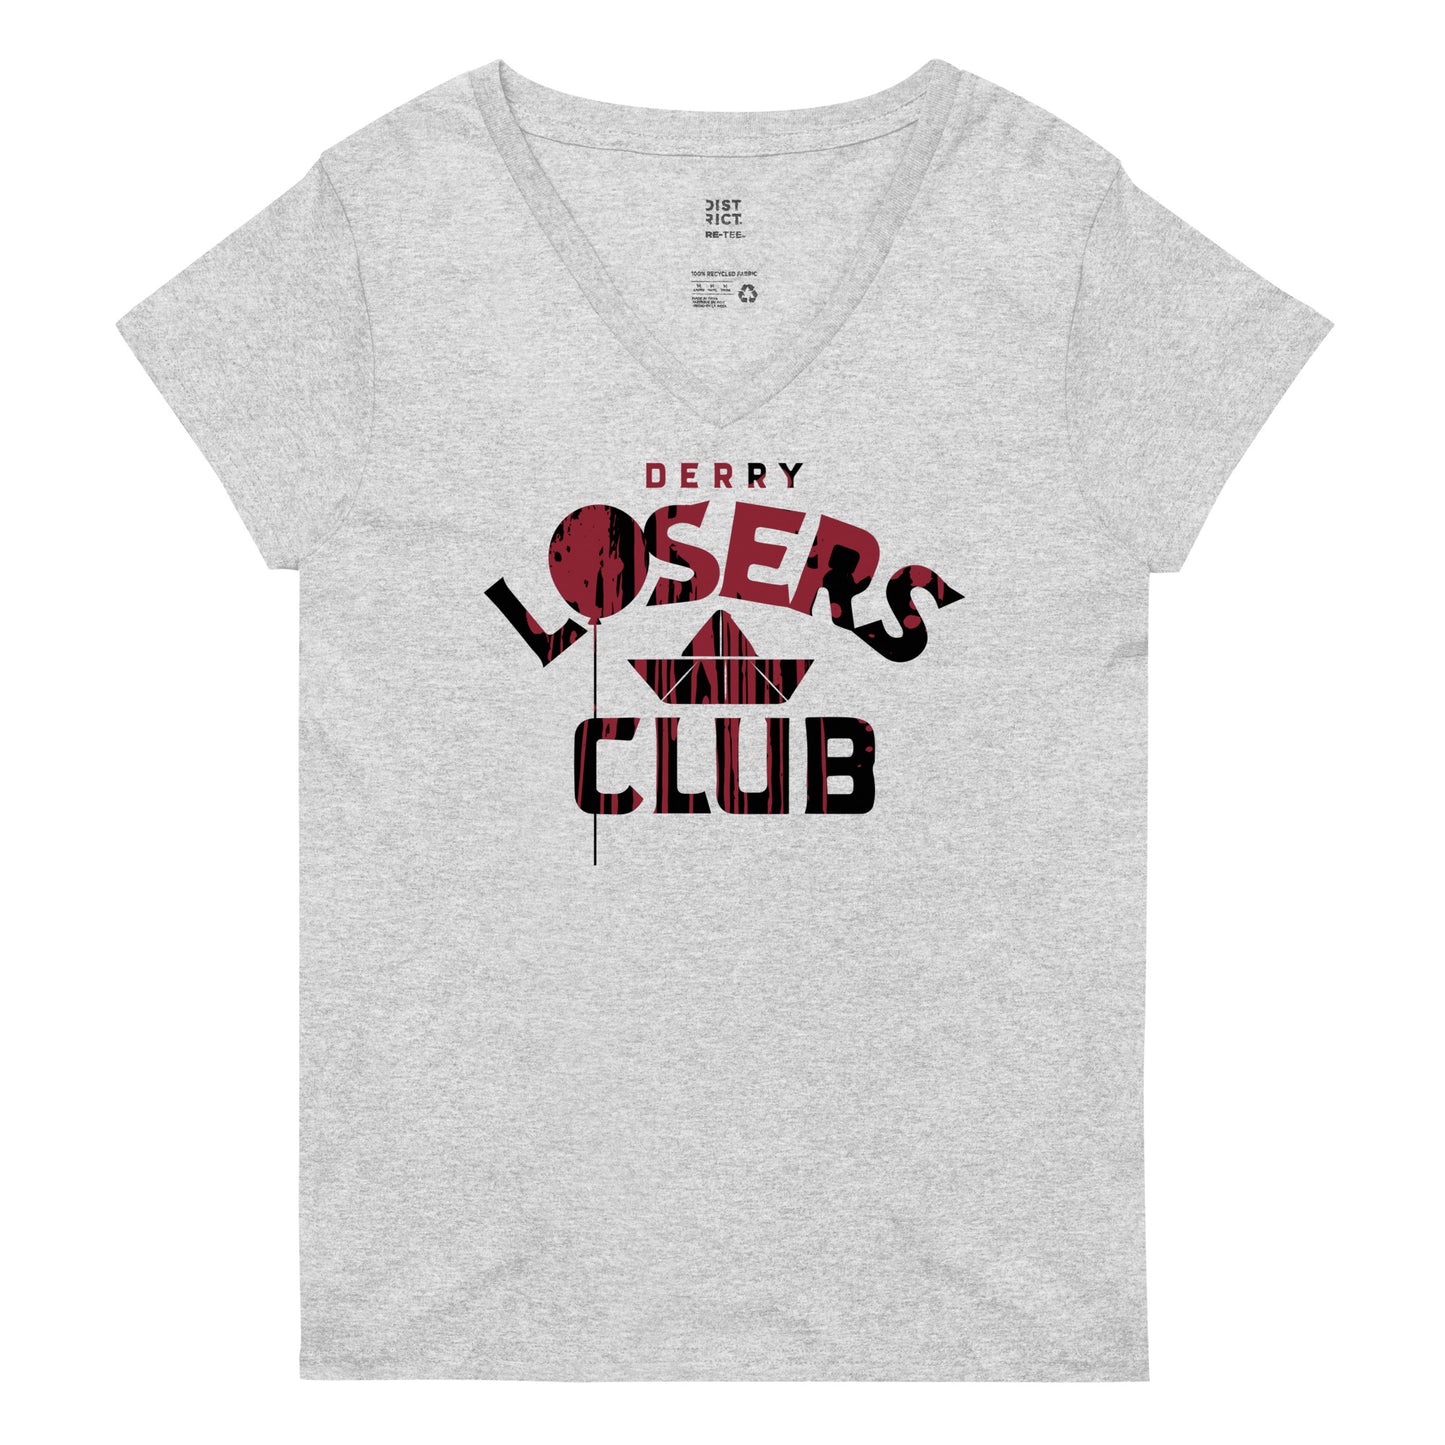 Derry Losers Club Women's V-Neck Tee